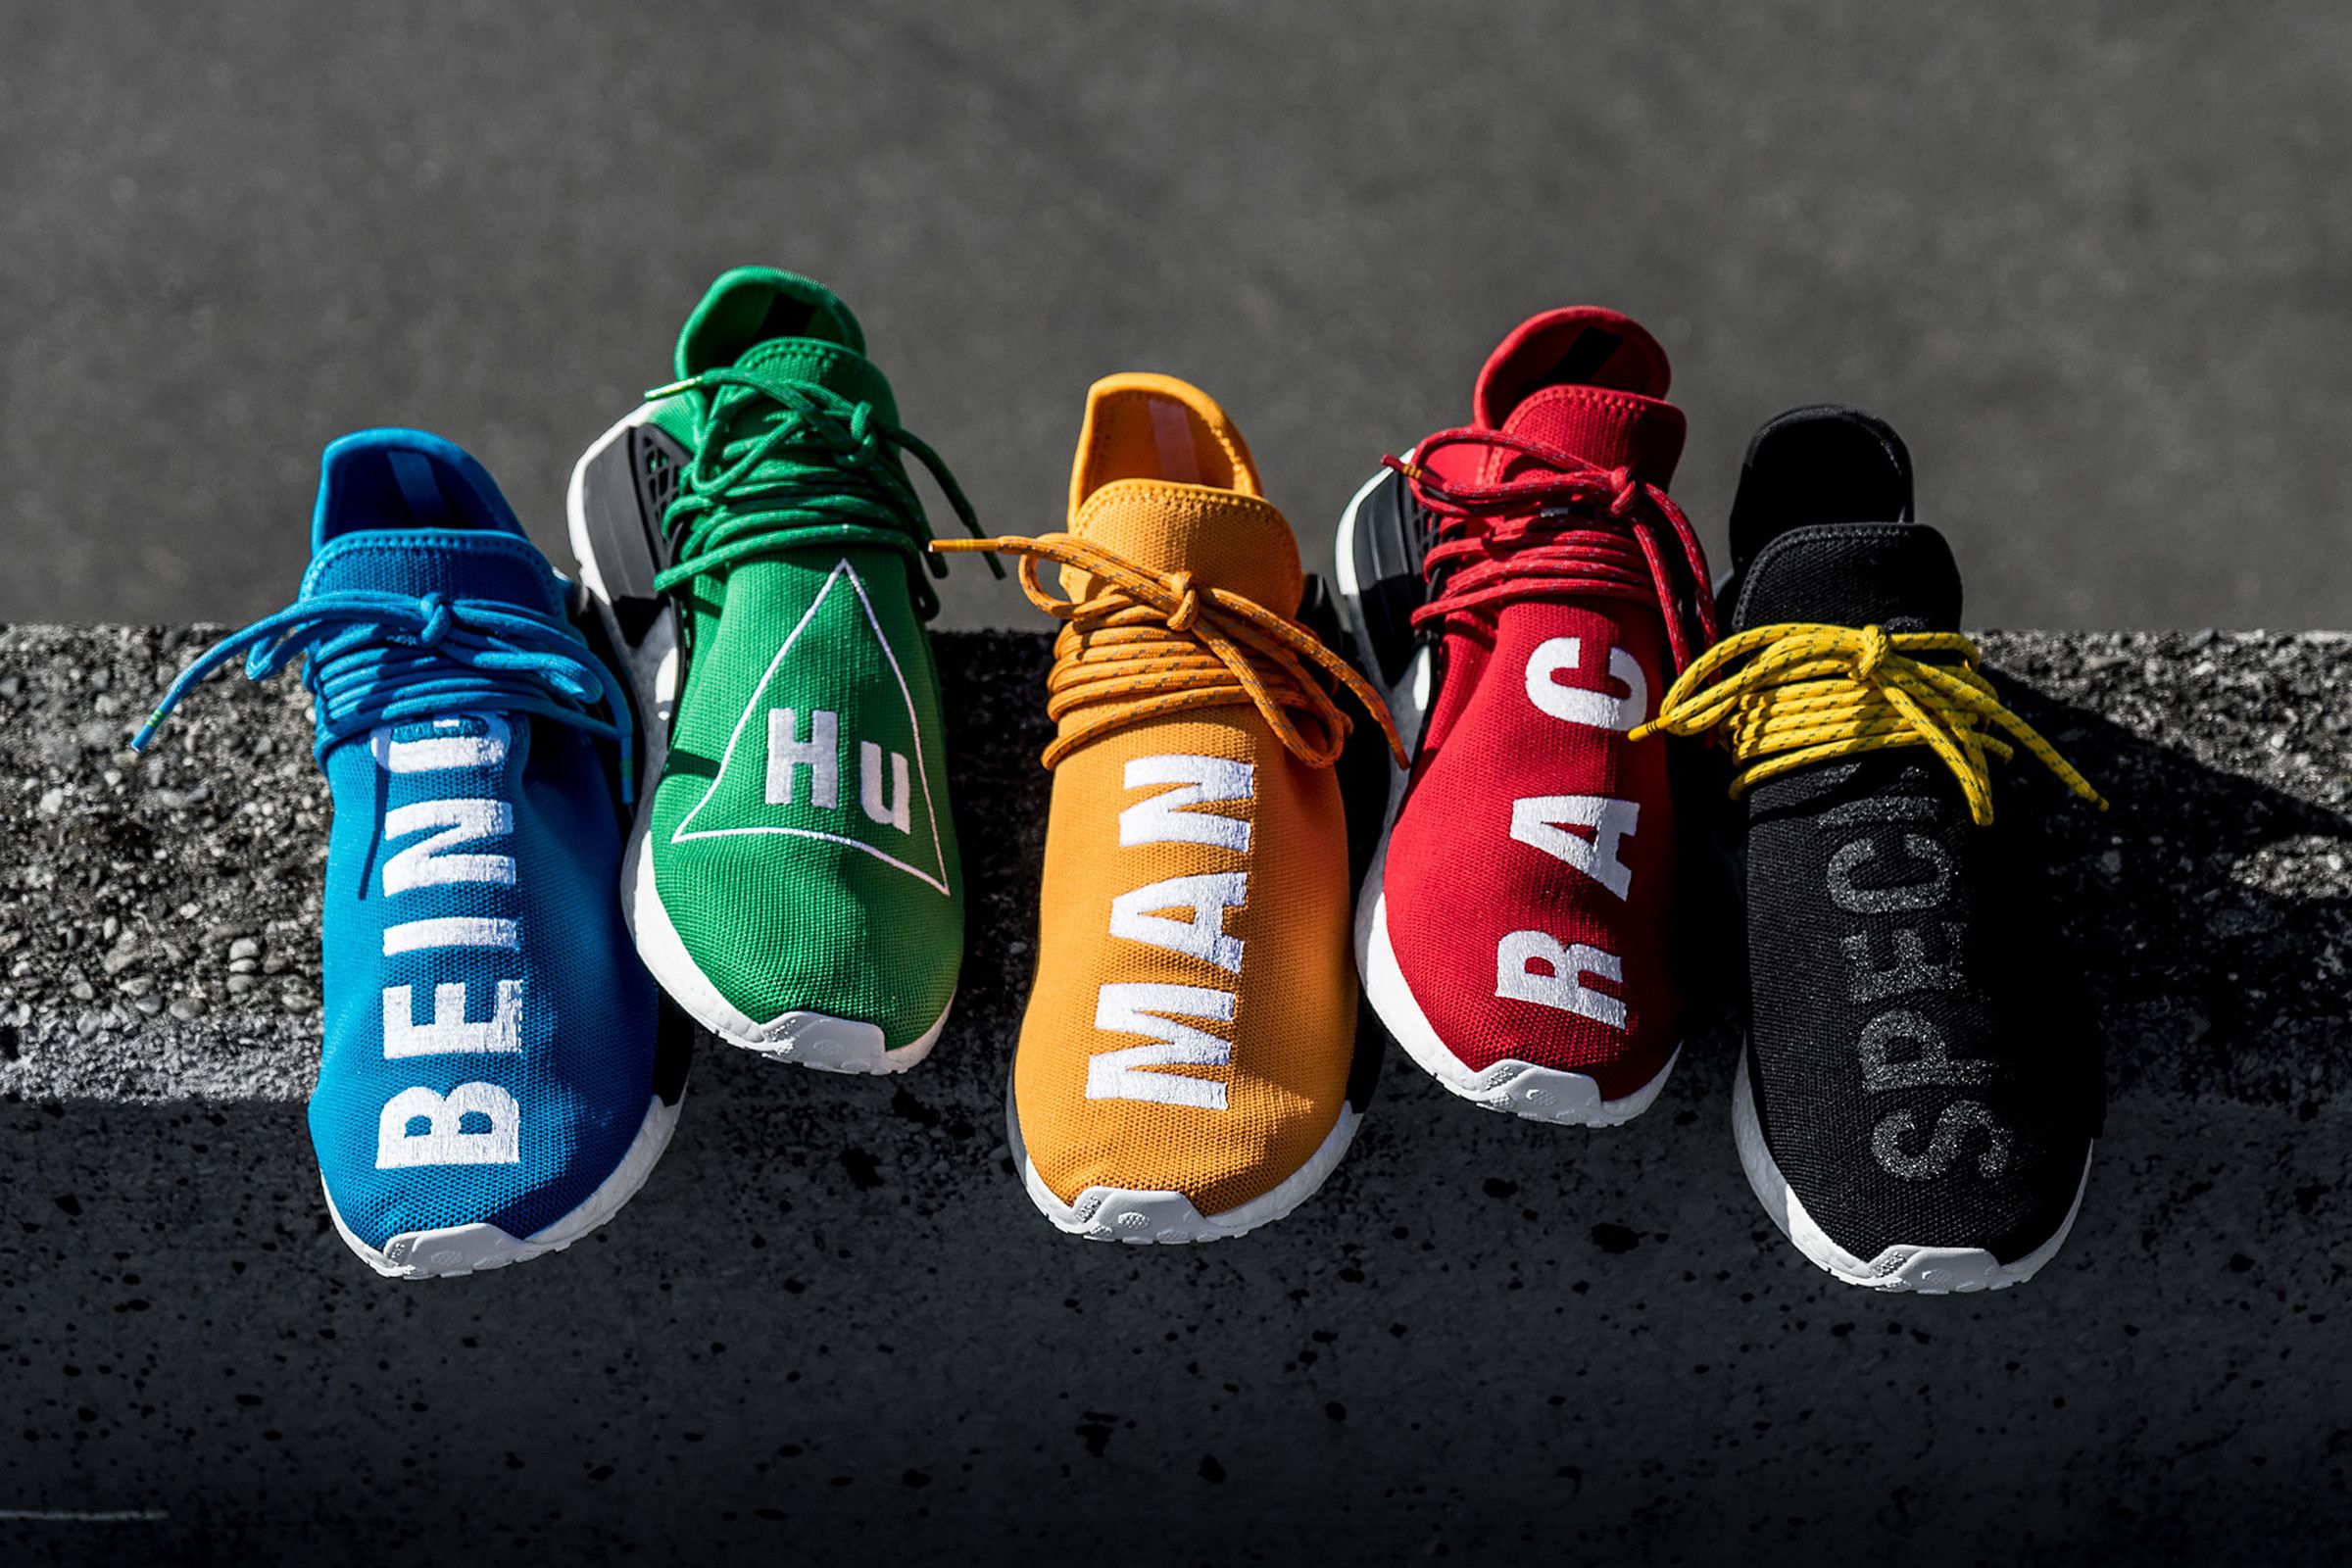 Early colorways from Pharrell's collaboration adidas HU NMD collection